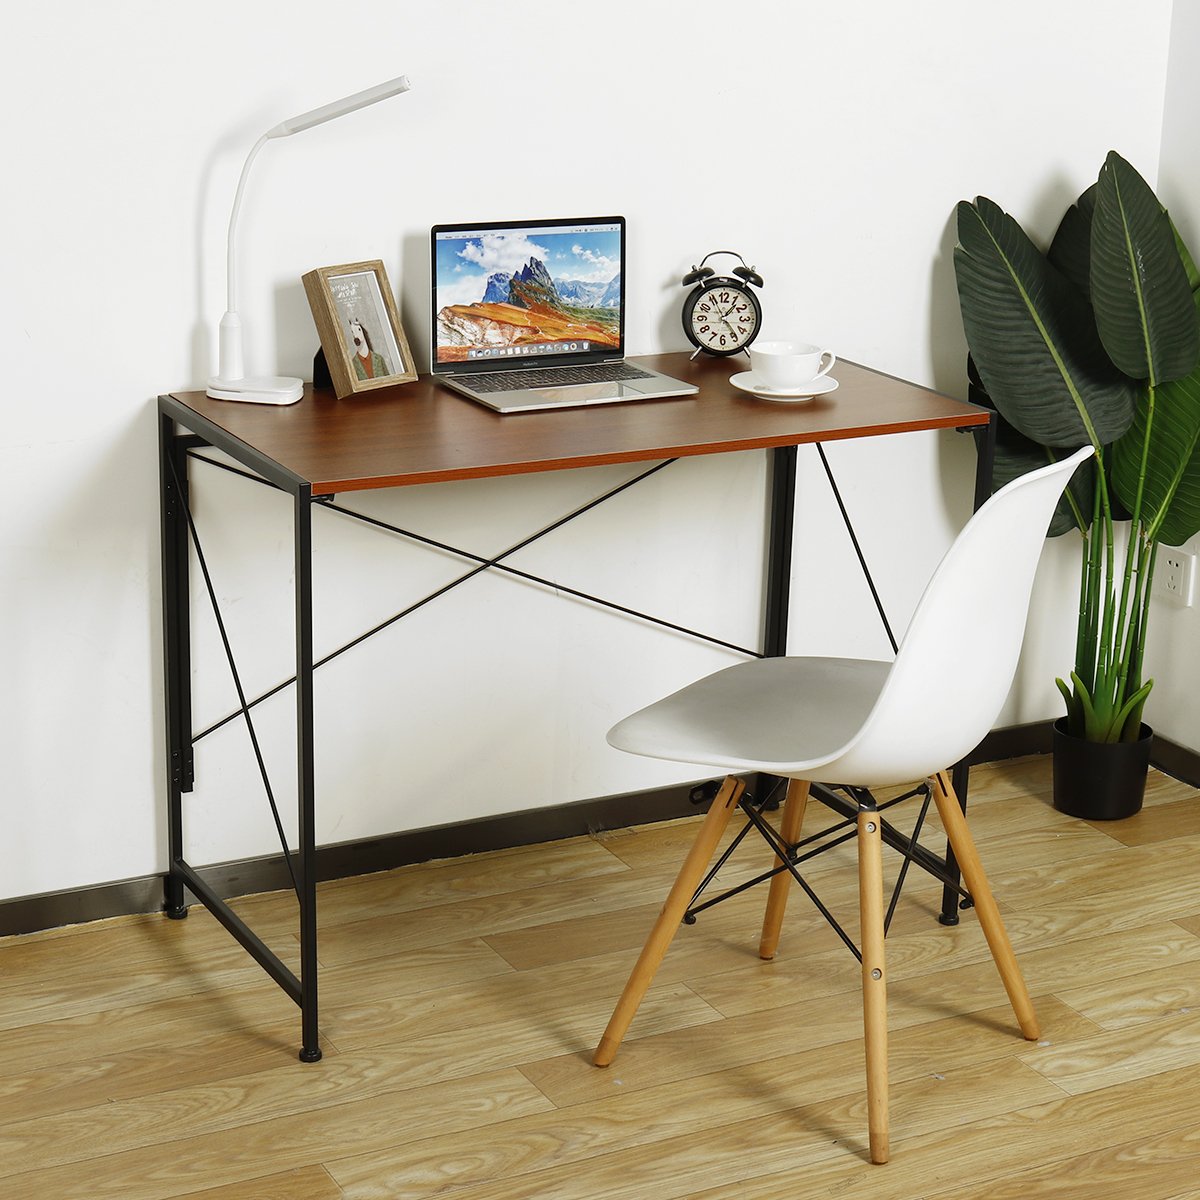 Foldable Console Table For Entryway Storage